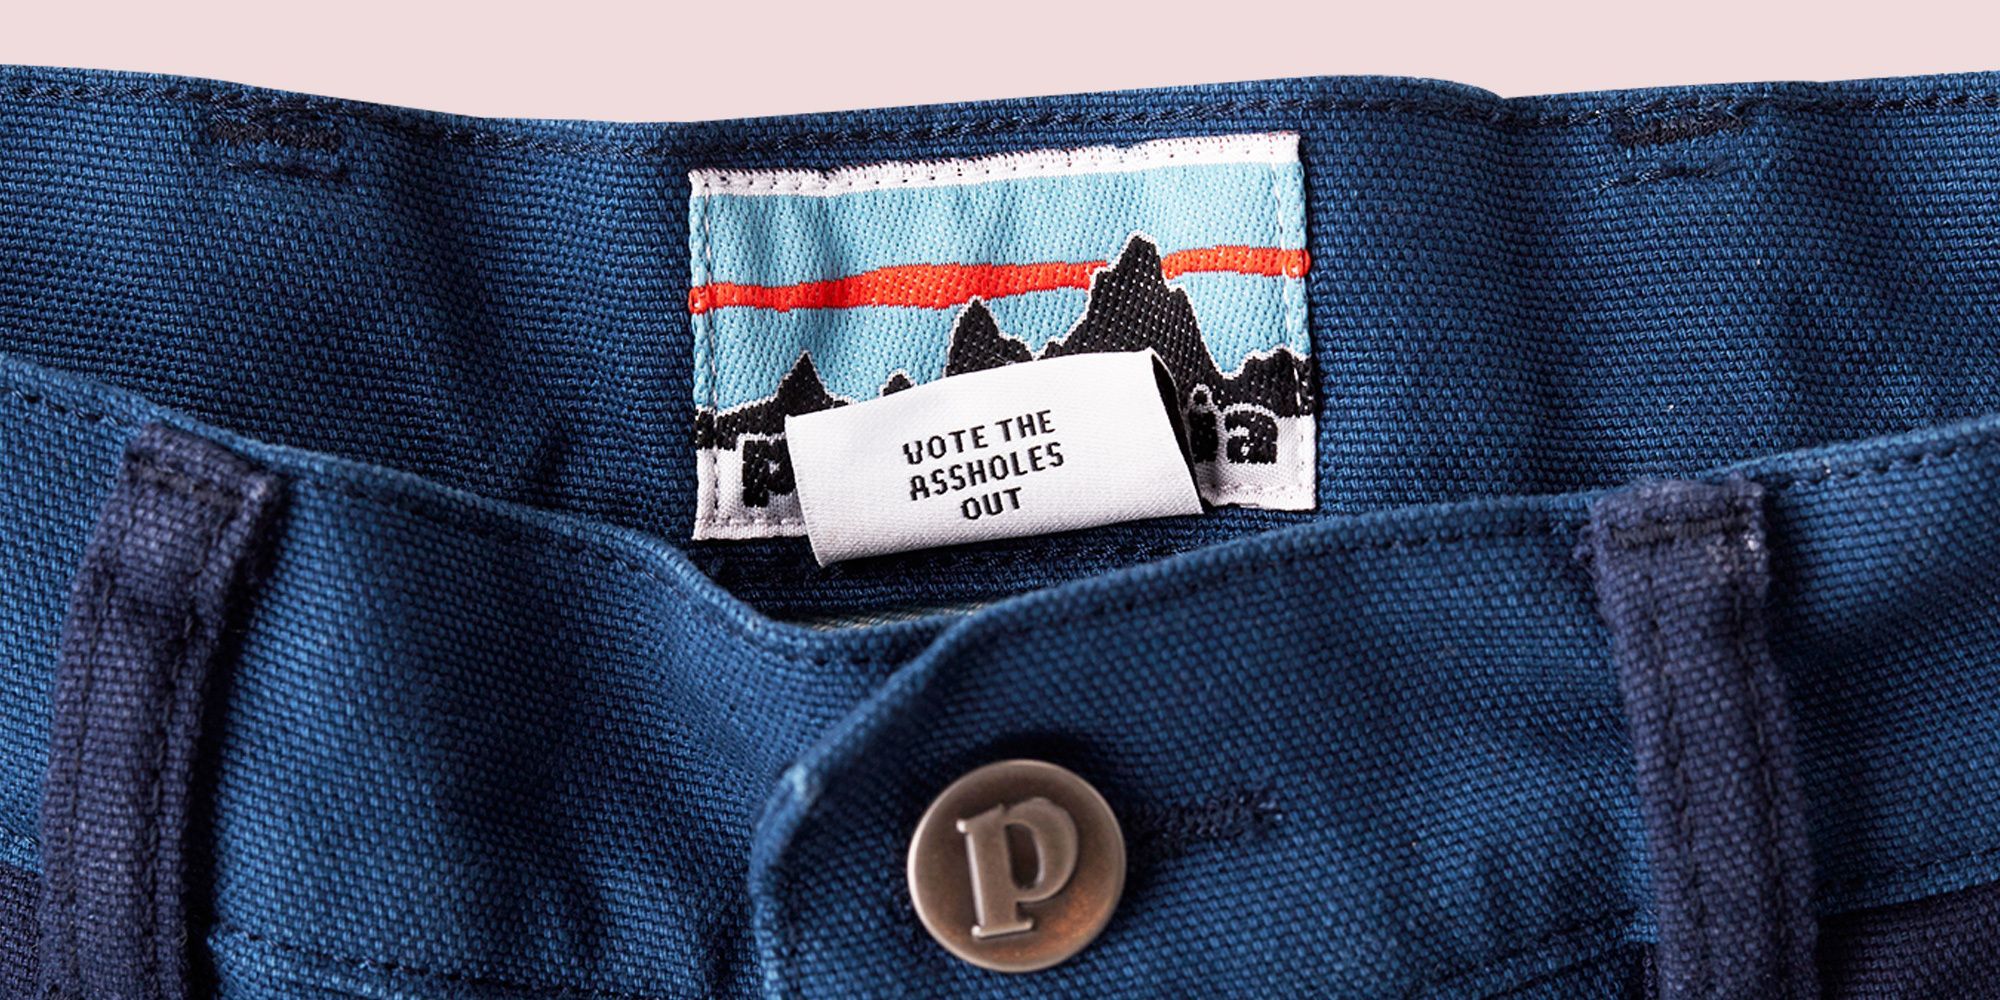 patagonia-vote-the-assholes-out-1600453600.jpg